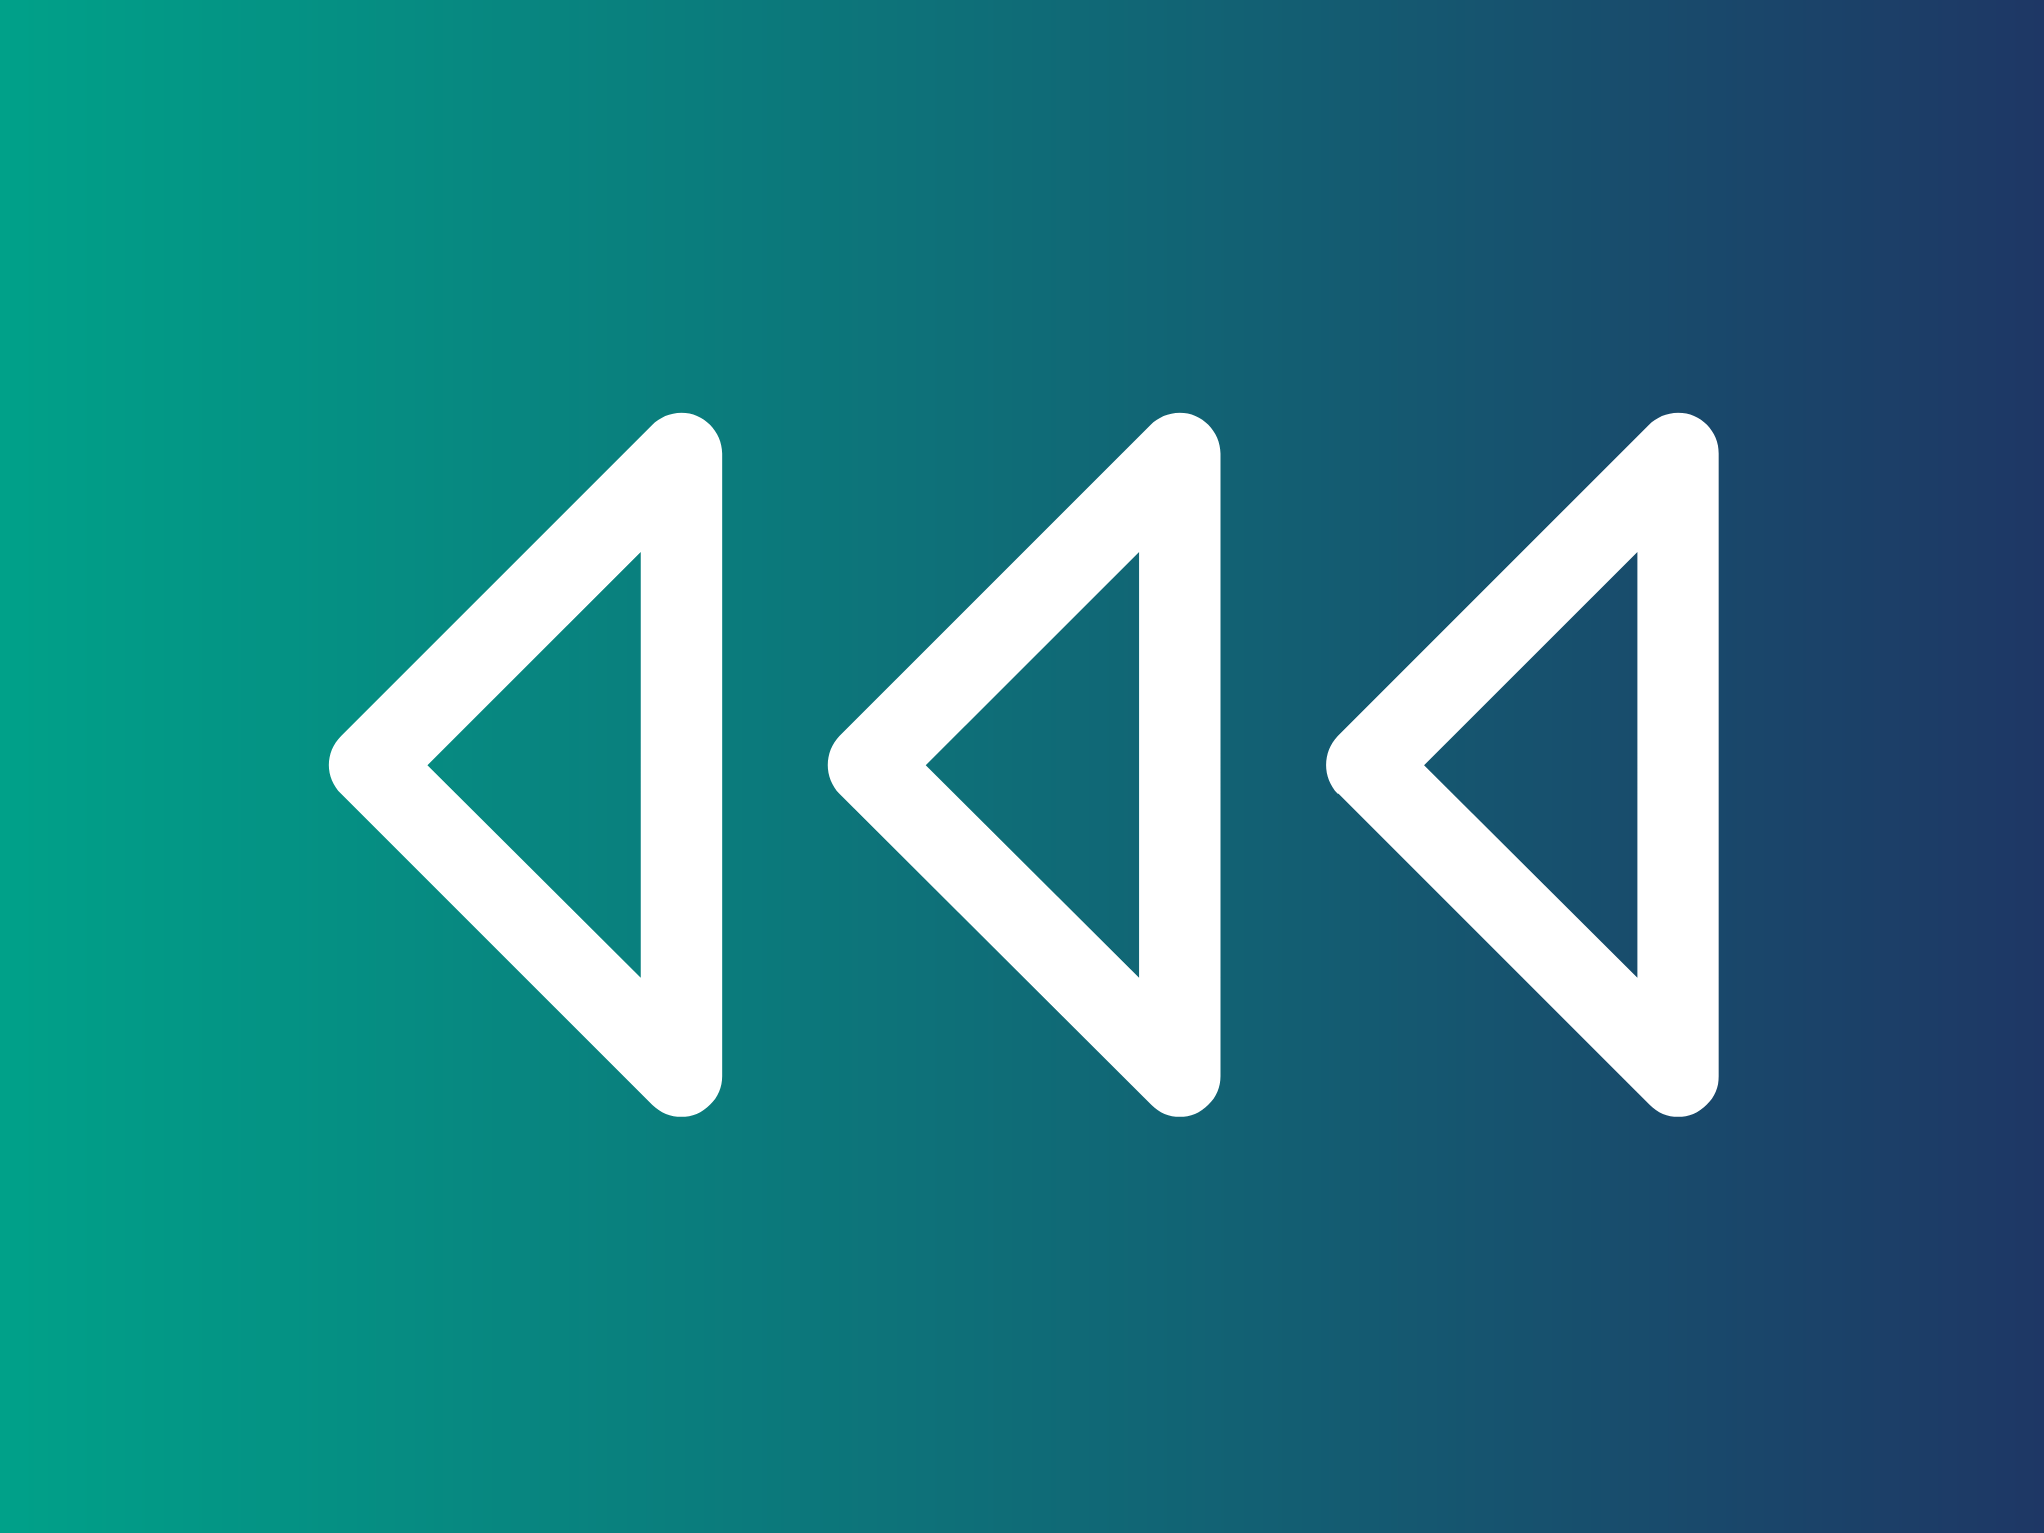 three triangle arrows facing left on teal and navy gradient background